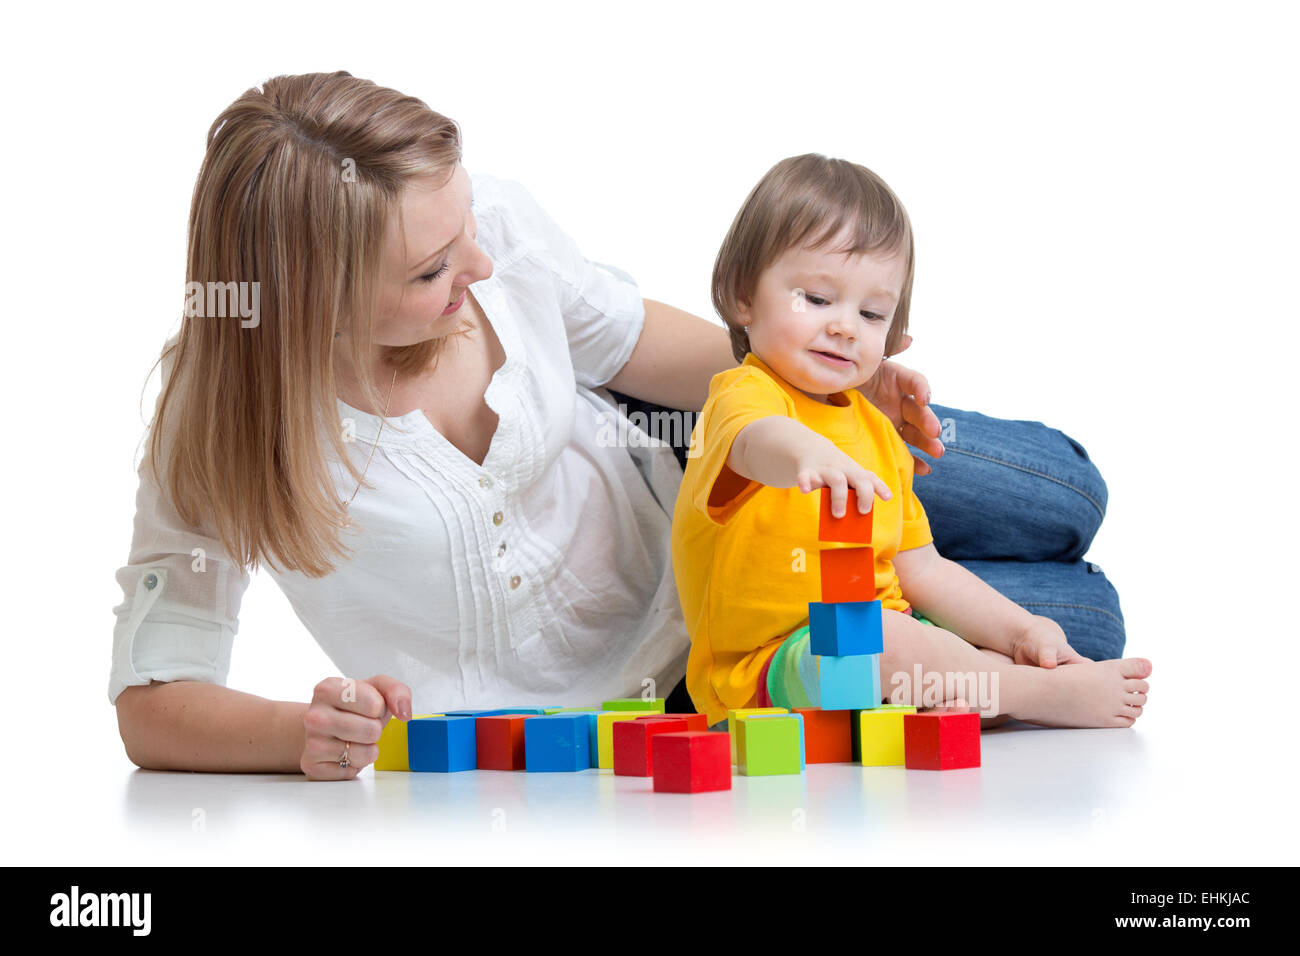 kid boy and mother play together with construction set toy Stock Photo